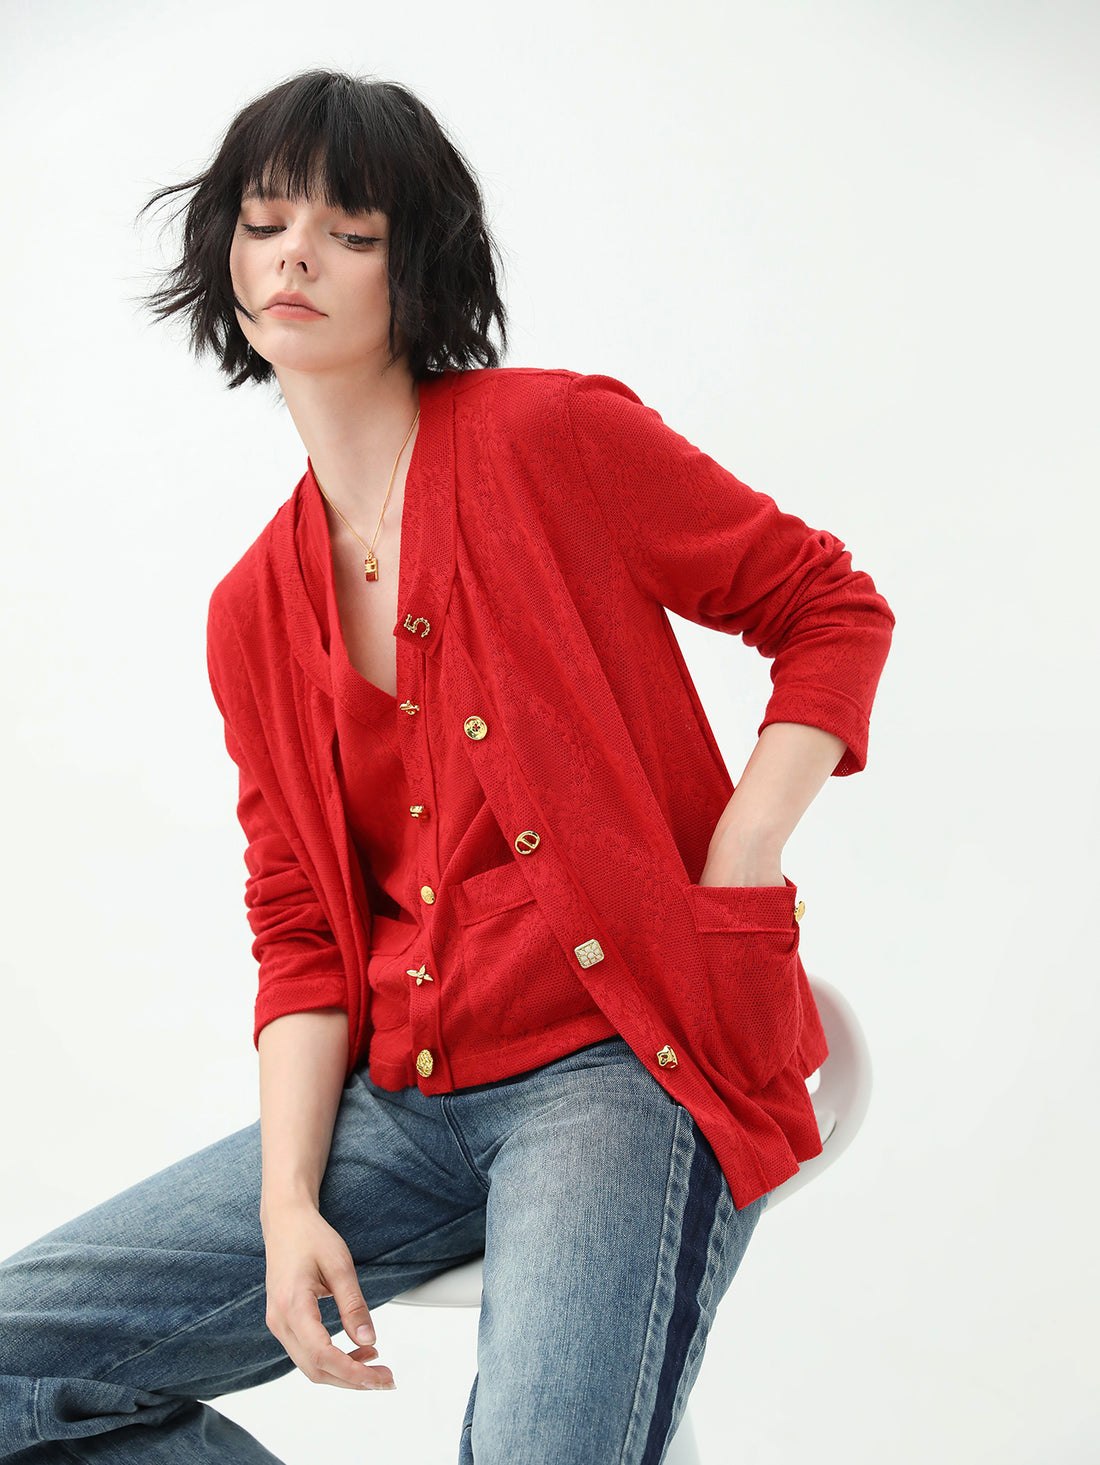 stylish-red-cardigan-with-gold-snap-buttons_all_red_2.jpg